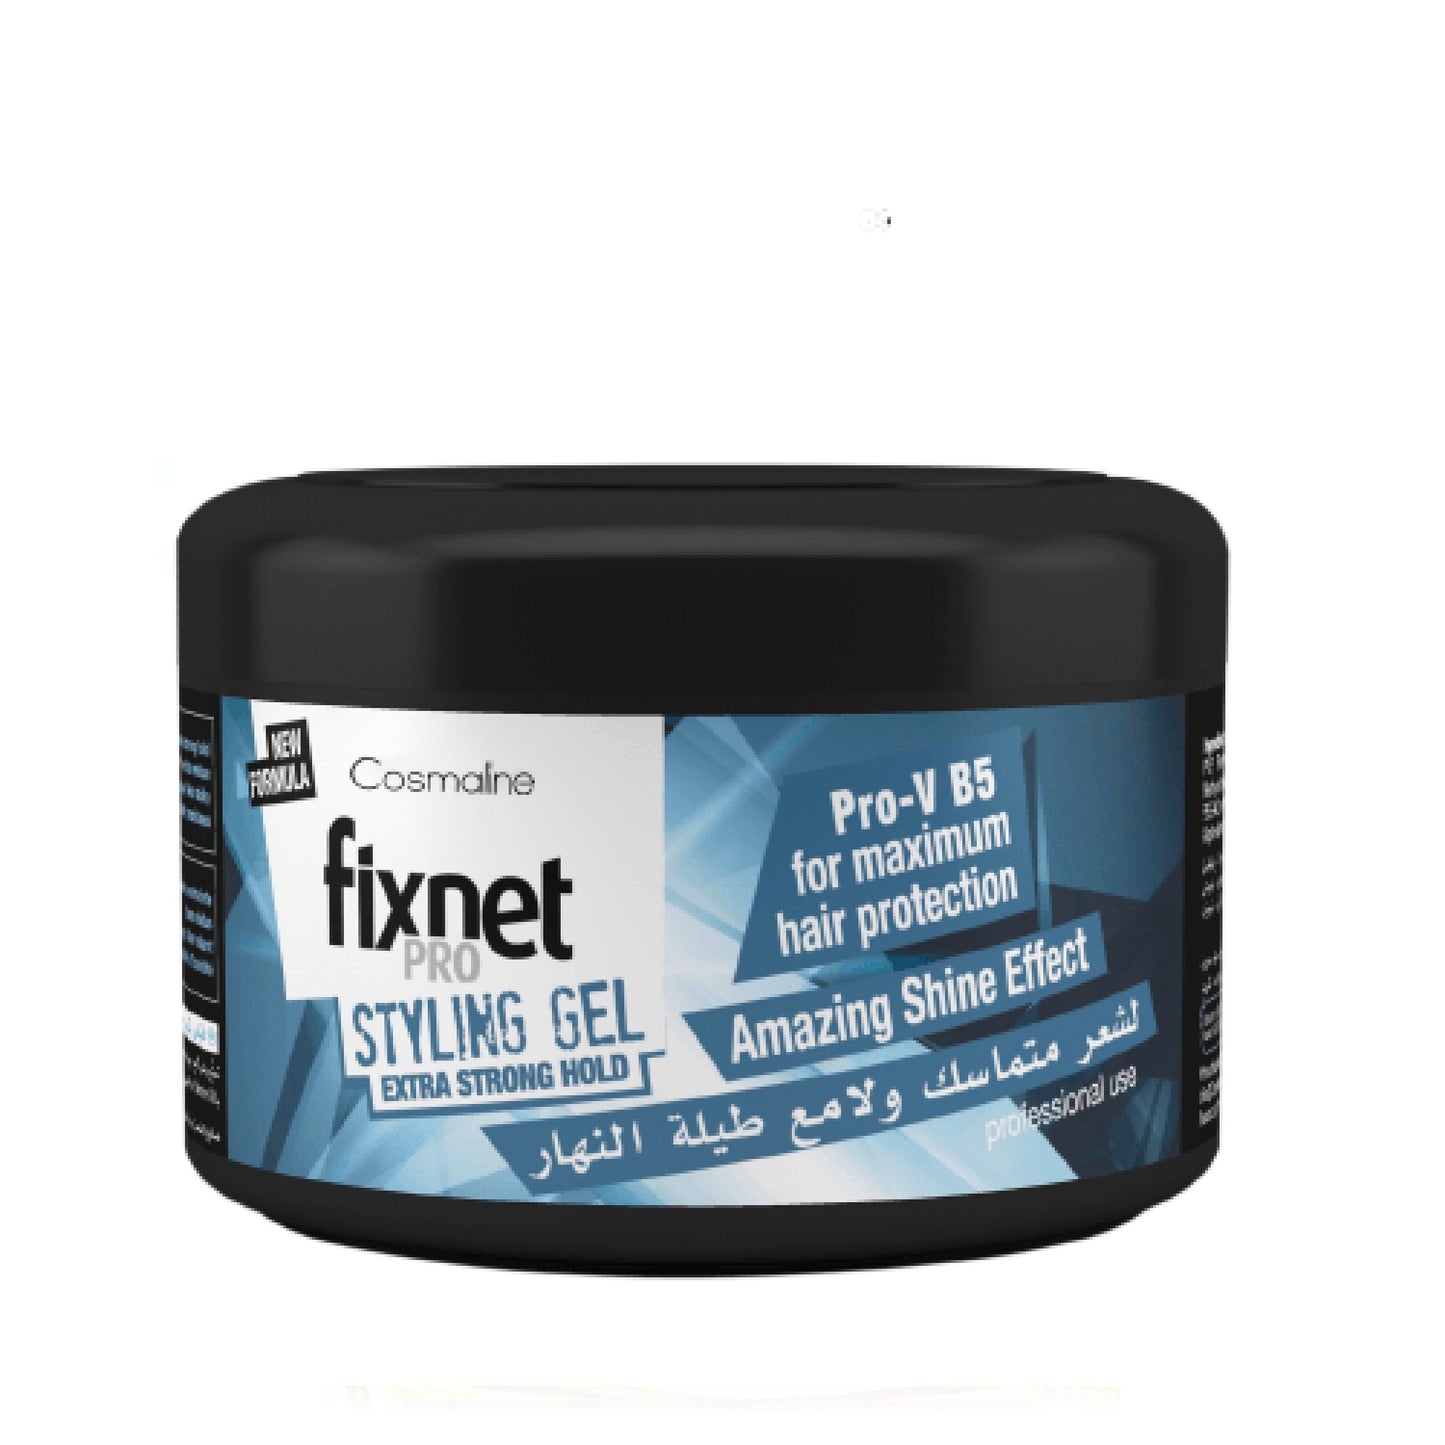 Cosmaline Fixnet Pro Styling Gel Extra Strong Hold Blue - Medaid - Lebanon